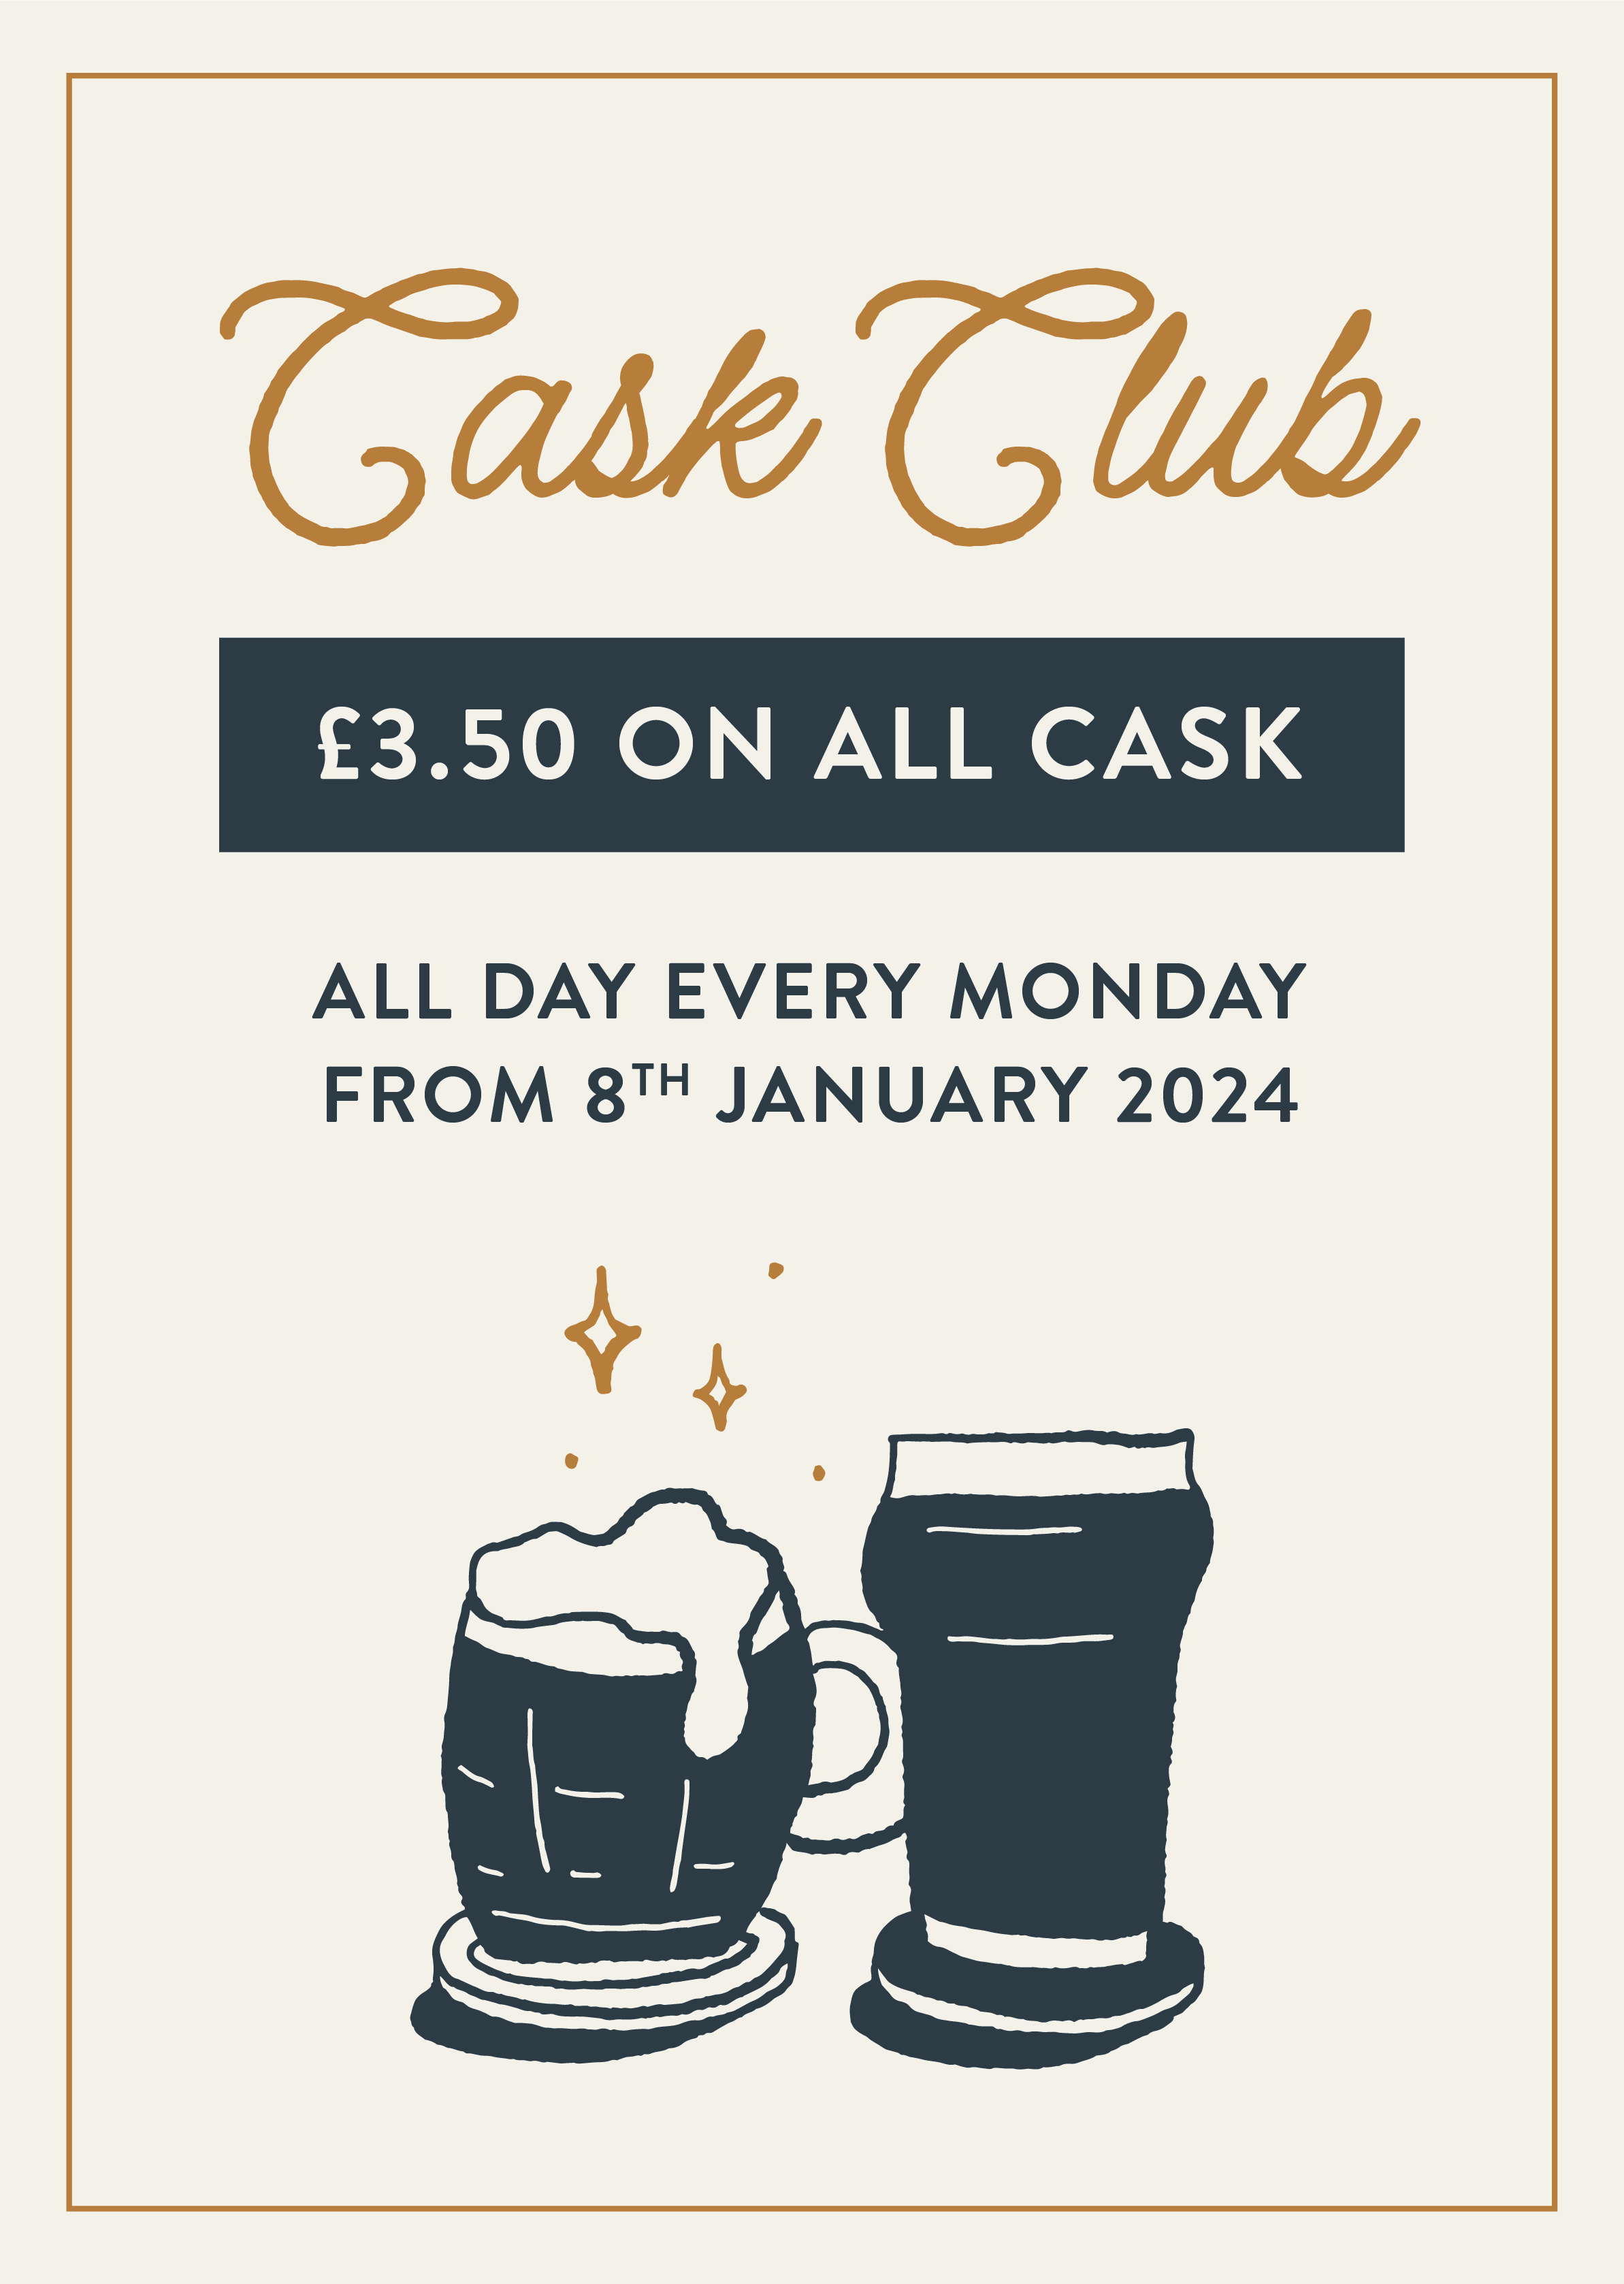 Cask club all.png